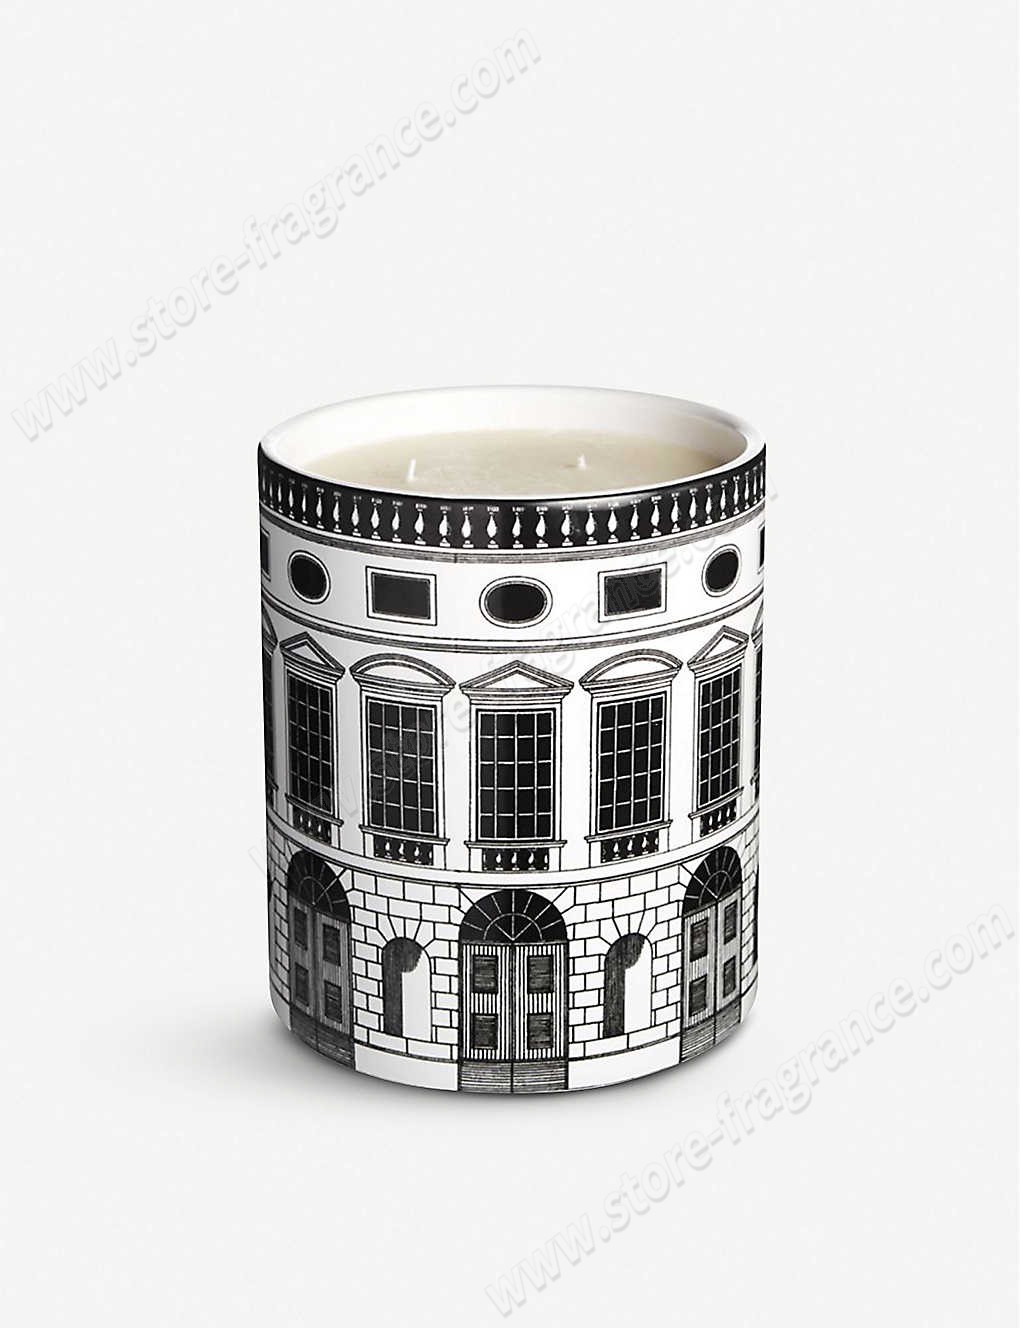 FORNASETTI/Architettura scented candle 1.9kg ✿ Discount Store - FORNASETTI/Architettura scented candle 1.9kg ✿ Discount Store